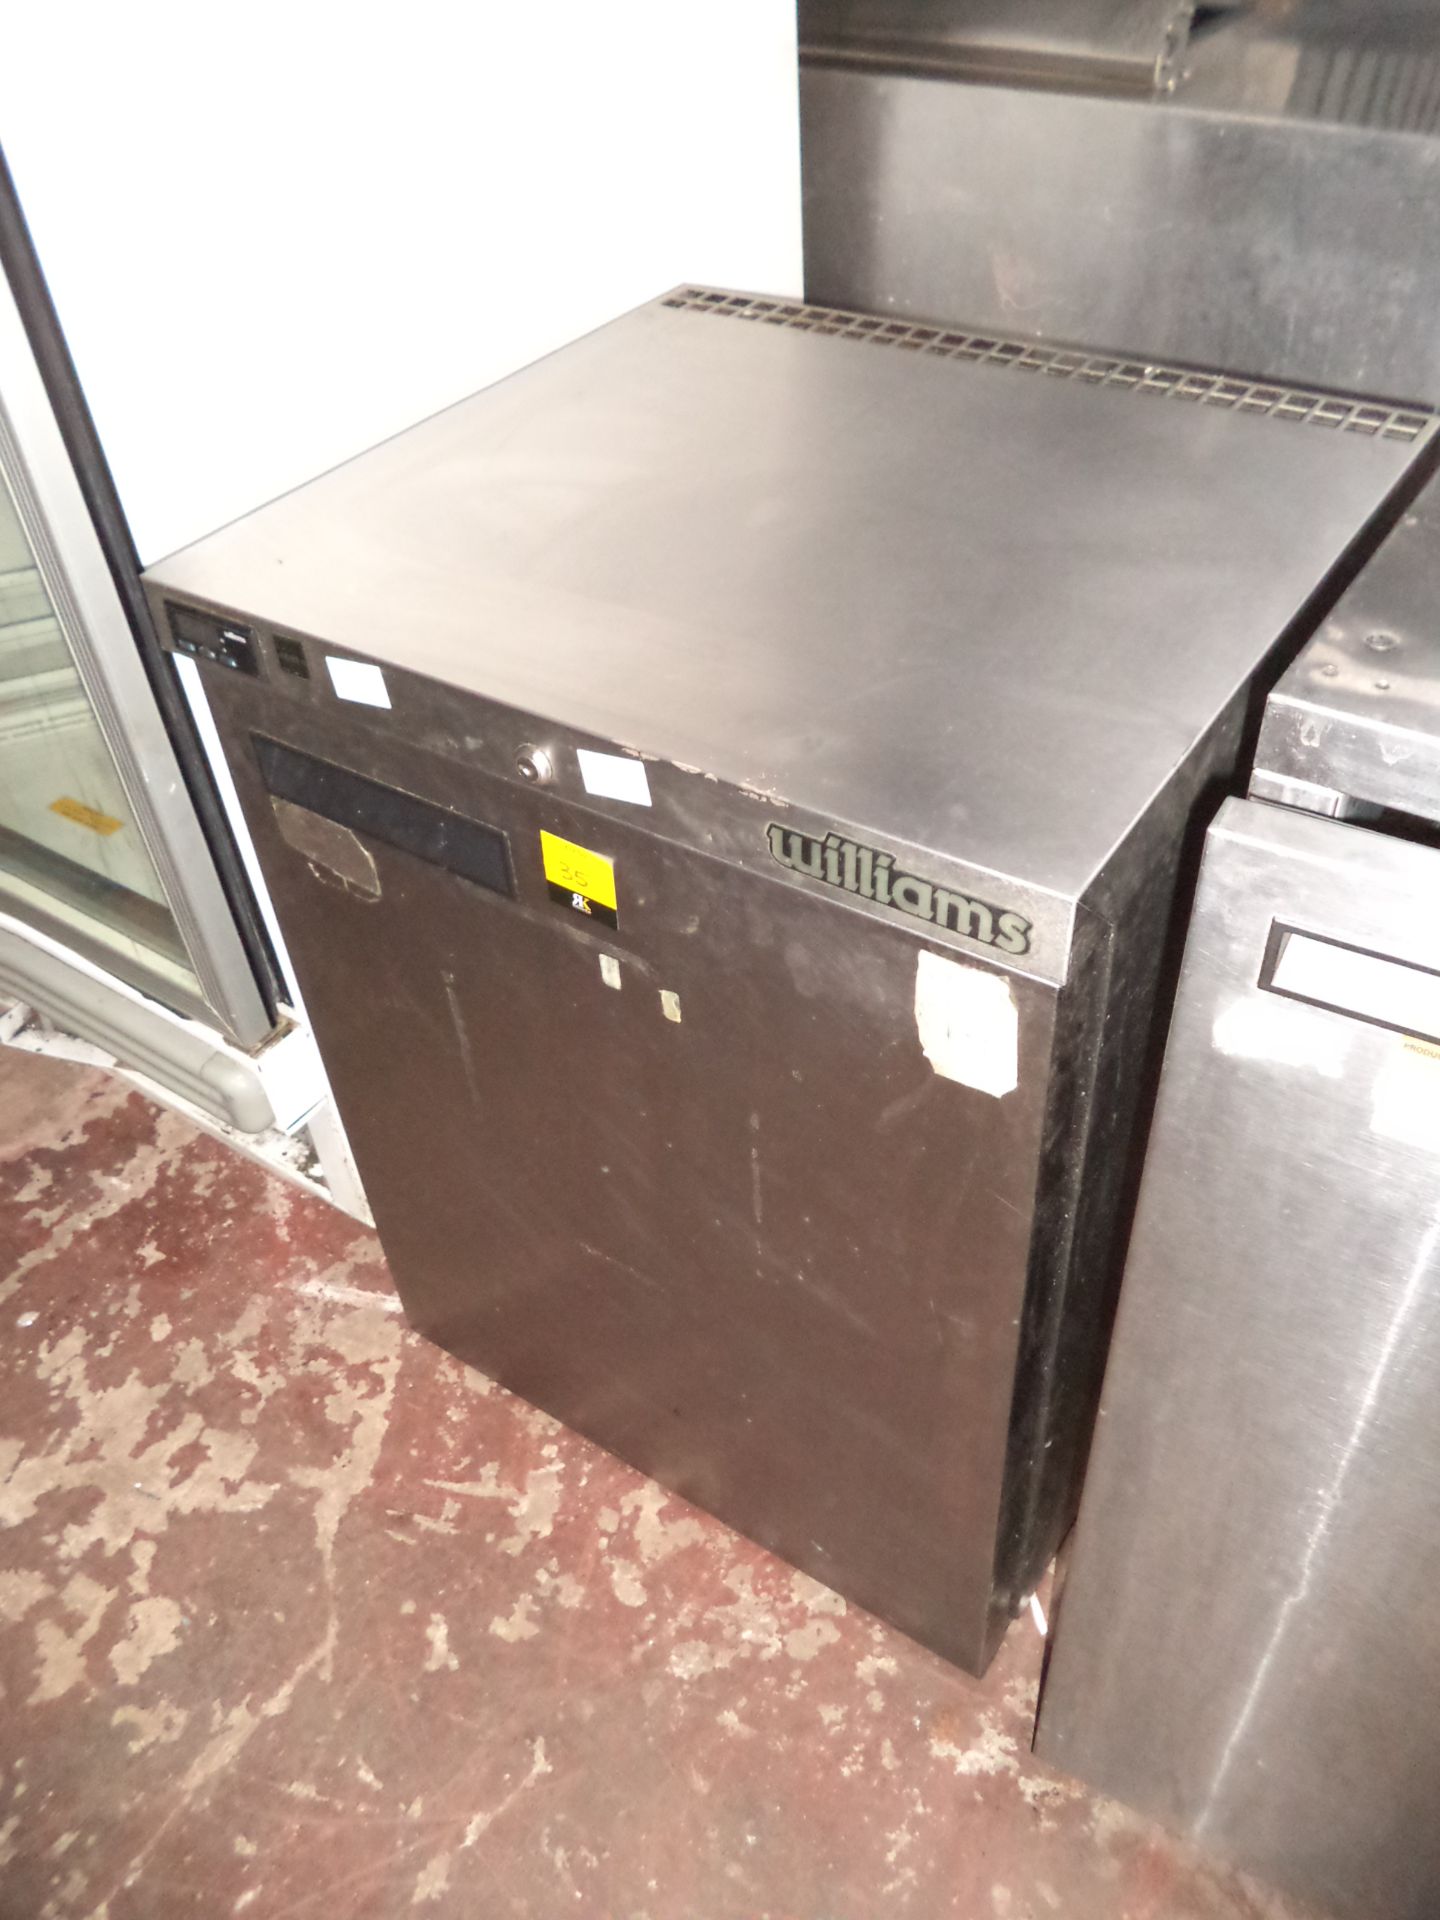 Williams stainless steel commercial counter height freezer, model LP5SS IMPORTANT: Please remember